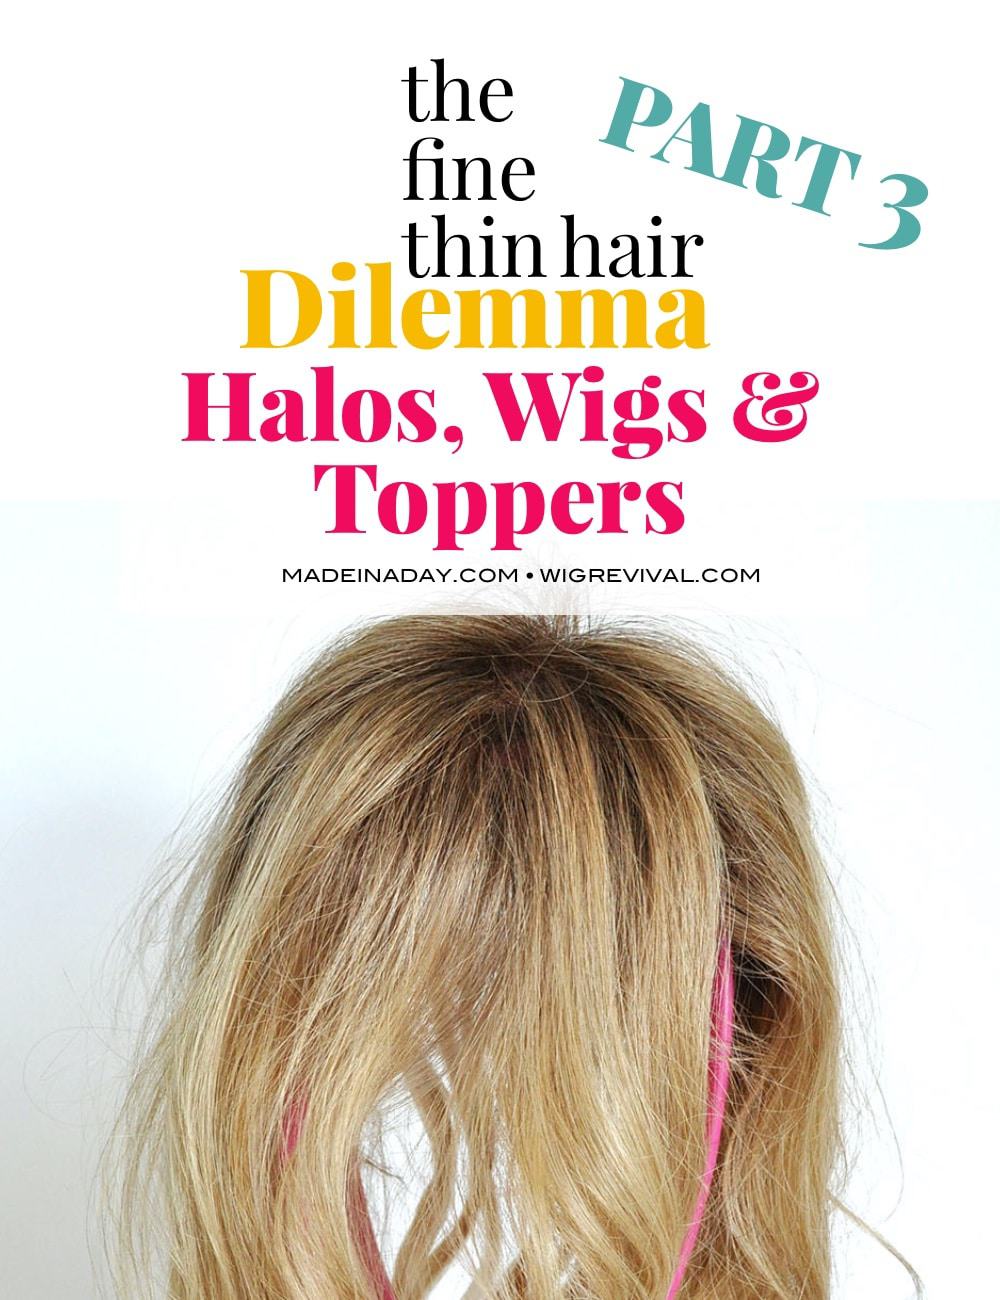 The Fine Thin Hair Dilemma: Halos, Wigs & Toppers